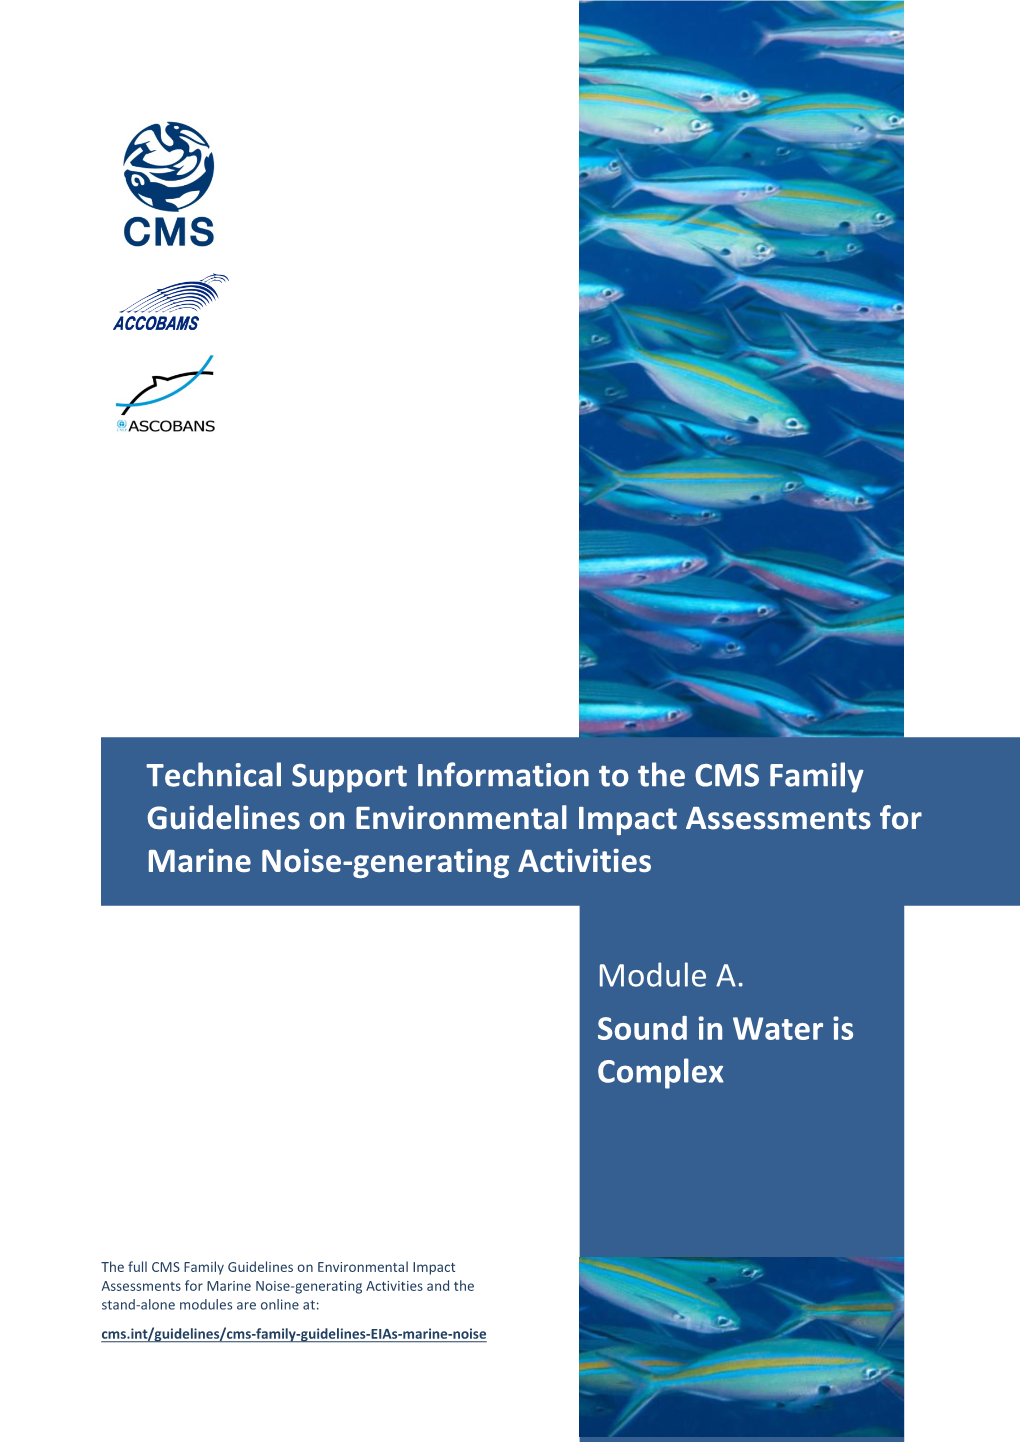 Technical Support Information to the CMS Family Guidelines on Environmental Impact Assessments for Marine Noise-Generating Activities